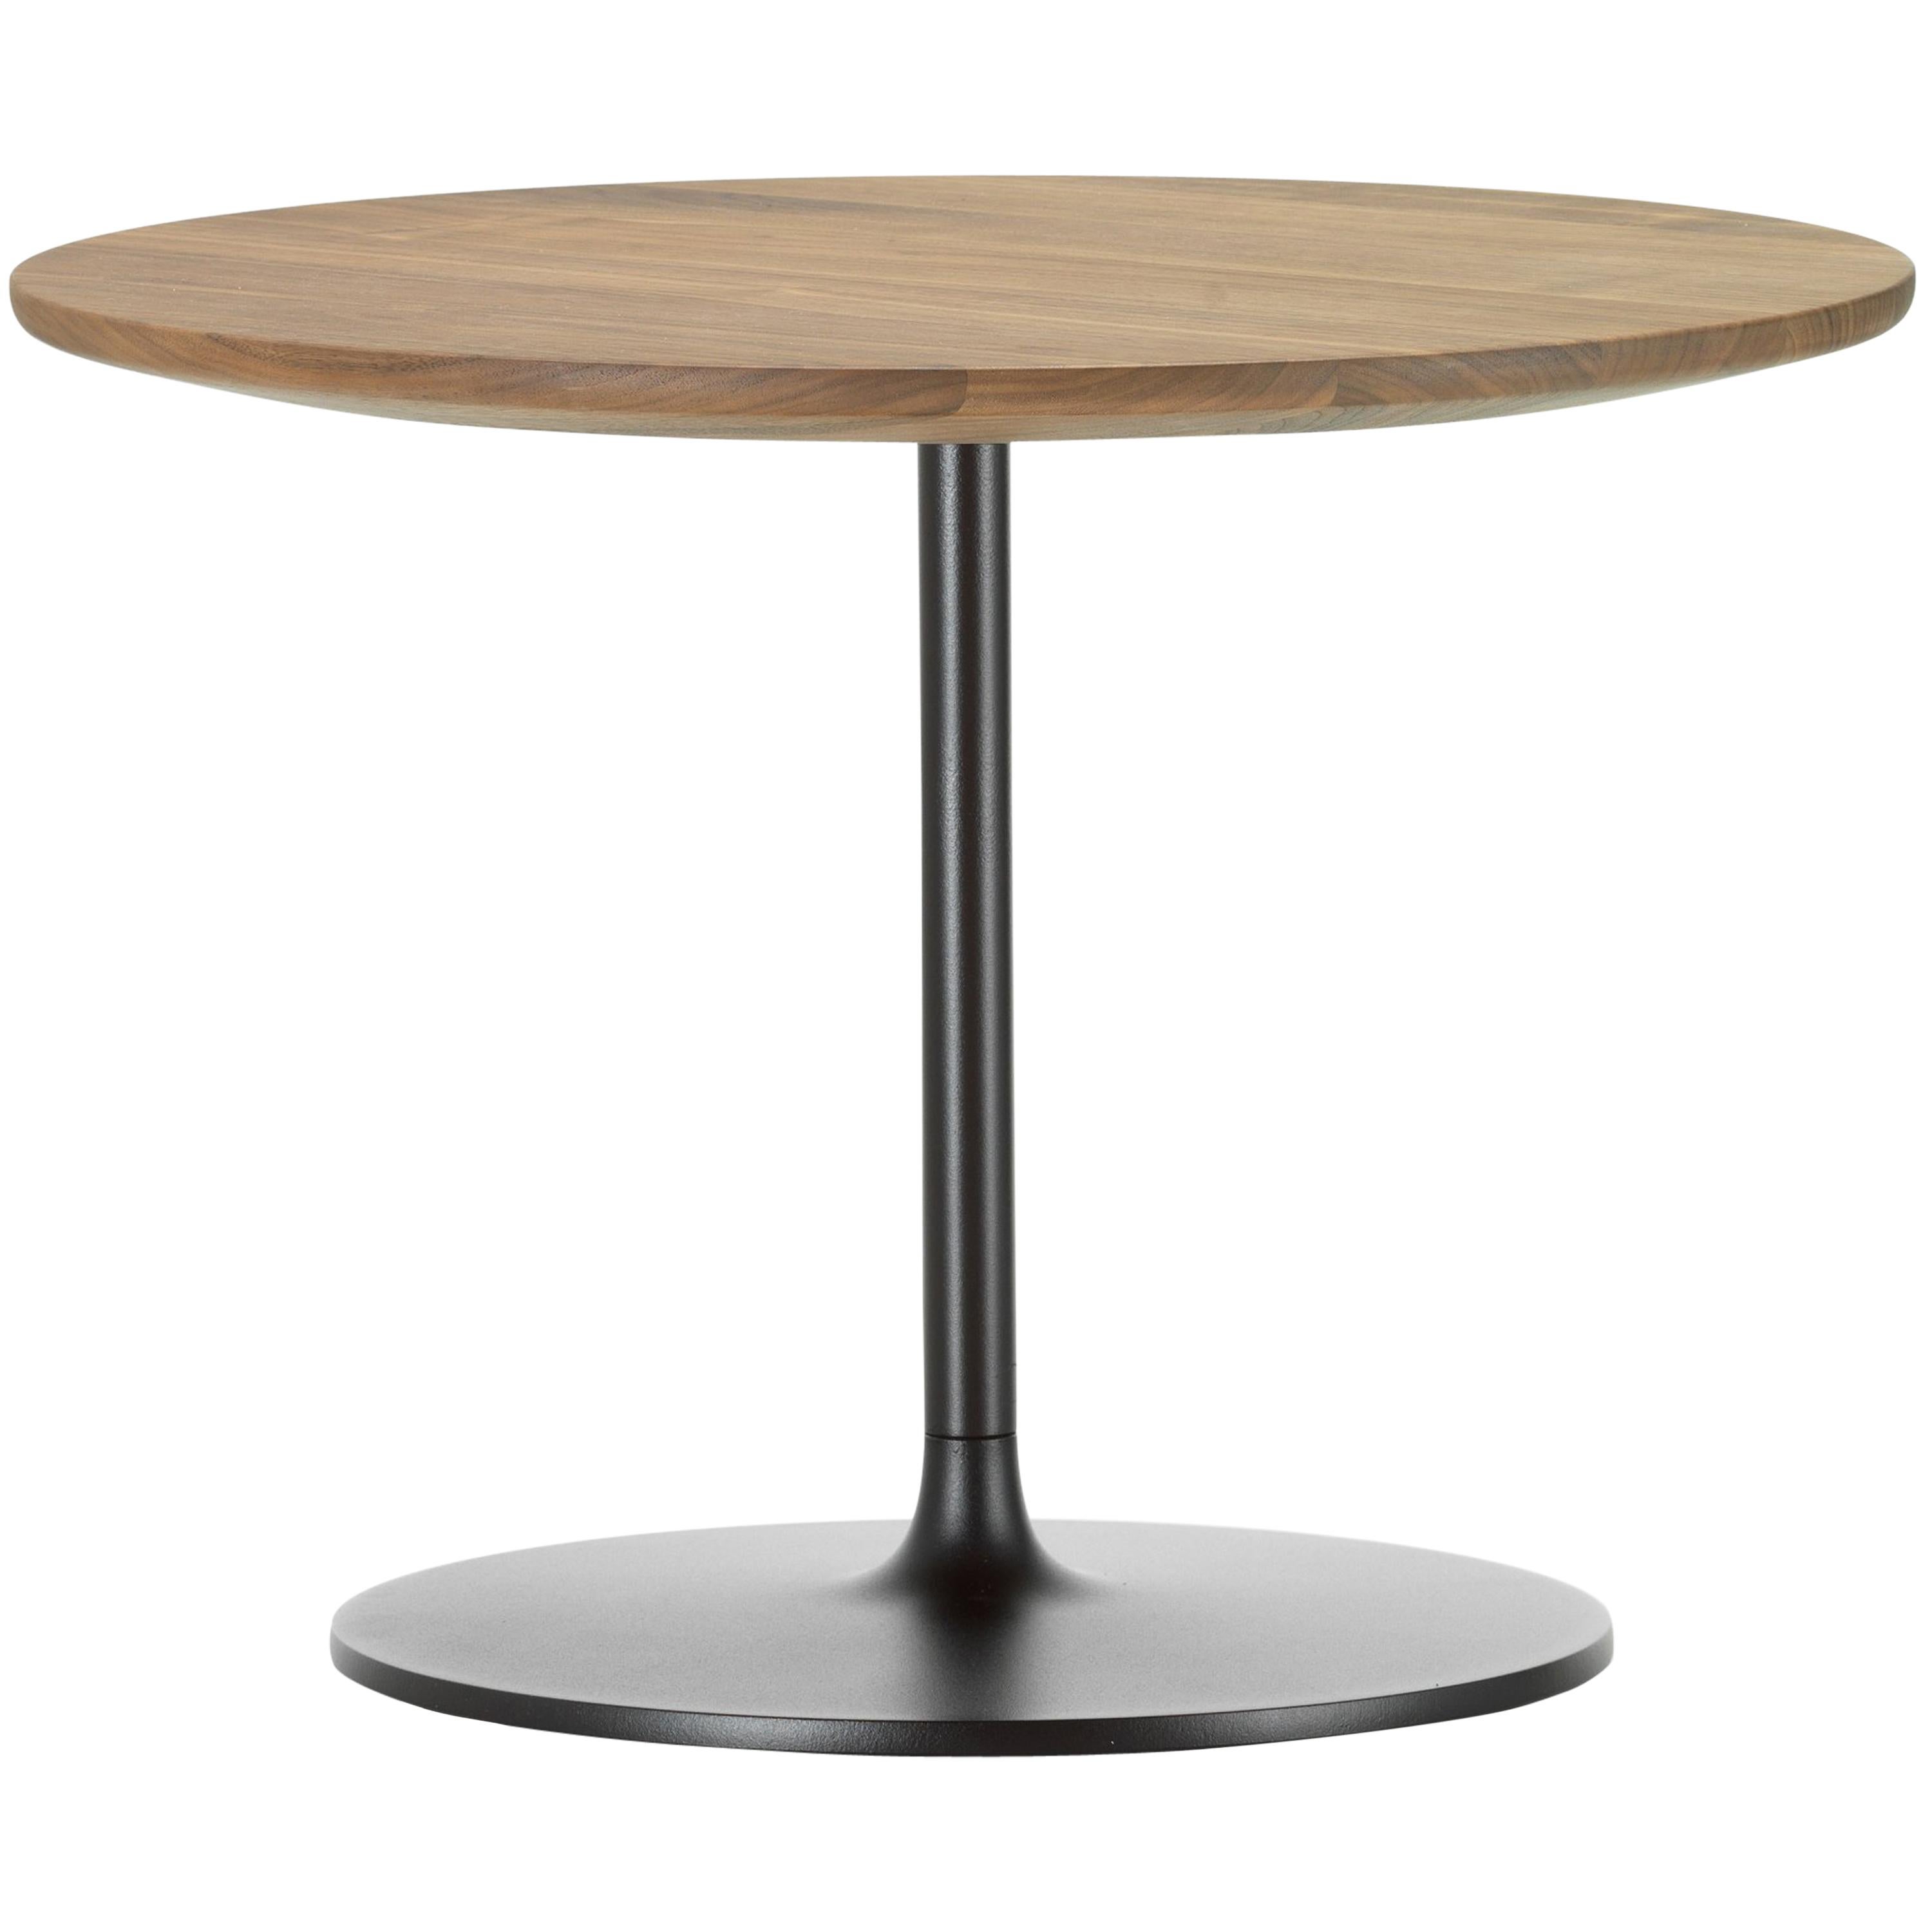 Vitra Occasional Low Table 35 in American Walnut Solid Wood by Jasper Morrison im Angebot